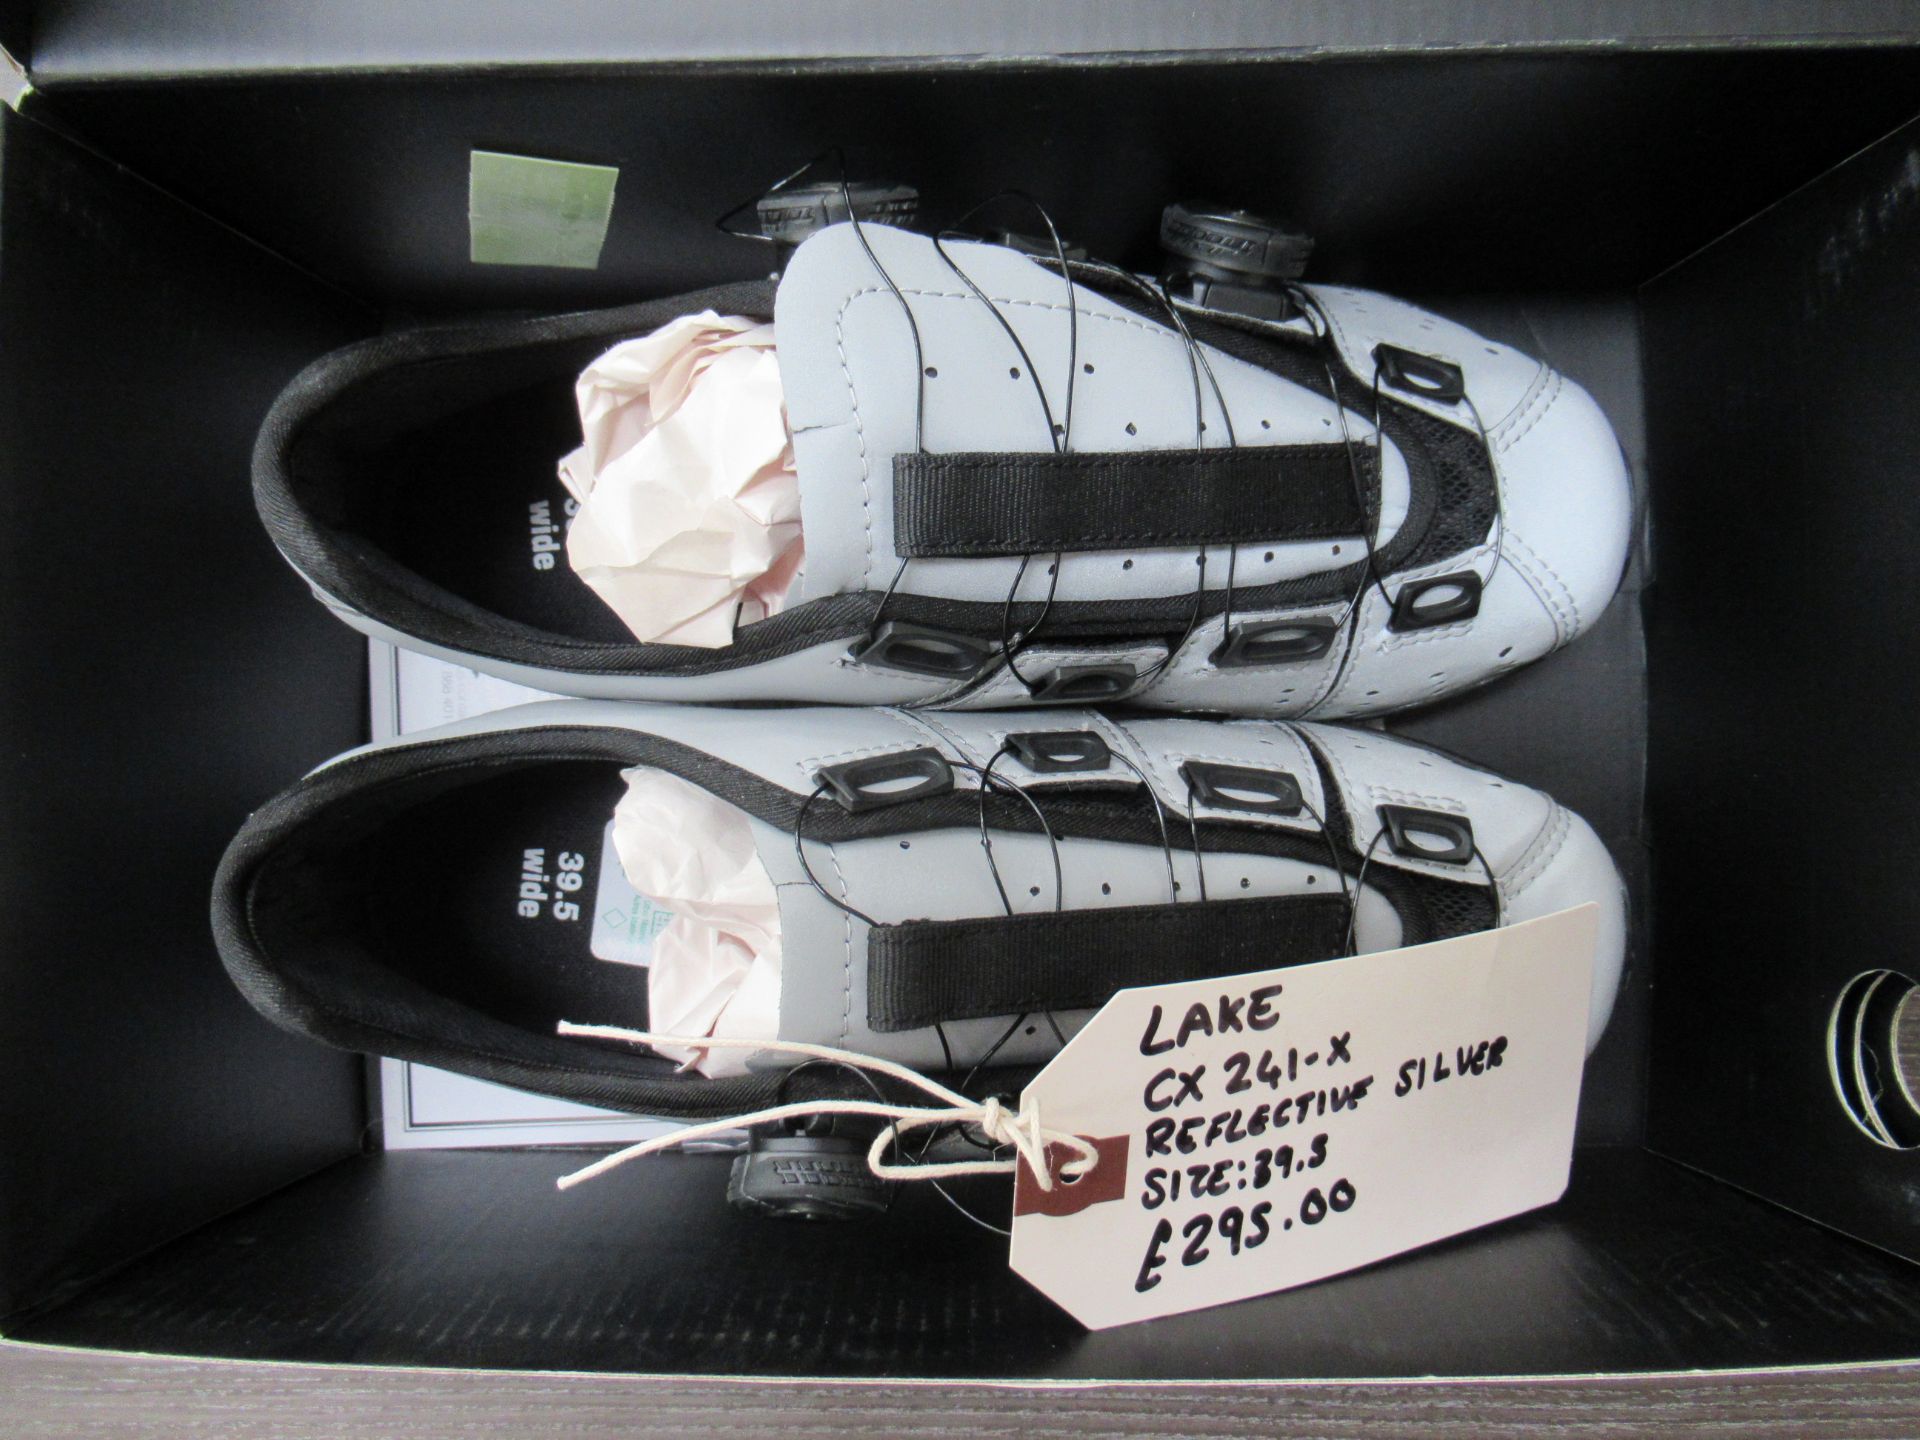 Pair of Lake CX241-X cycling shoes (reflective silver/grey) - boxed EU size 39.5 (RRP£295) - Image 4 of 4